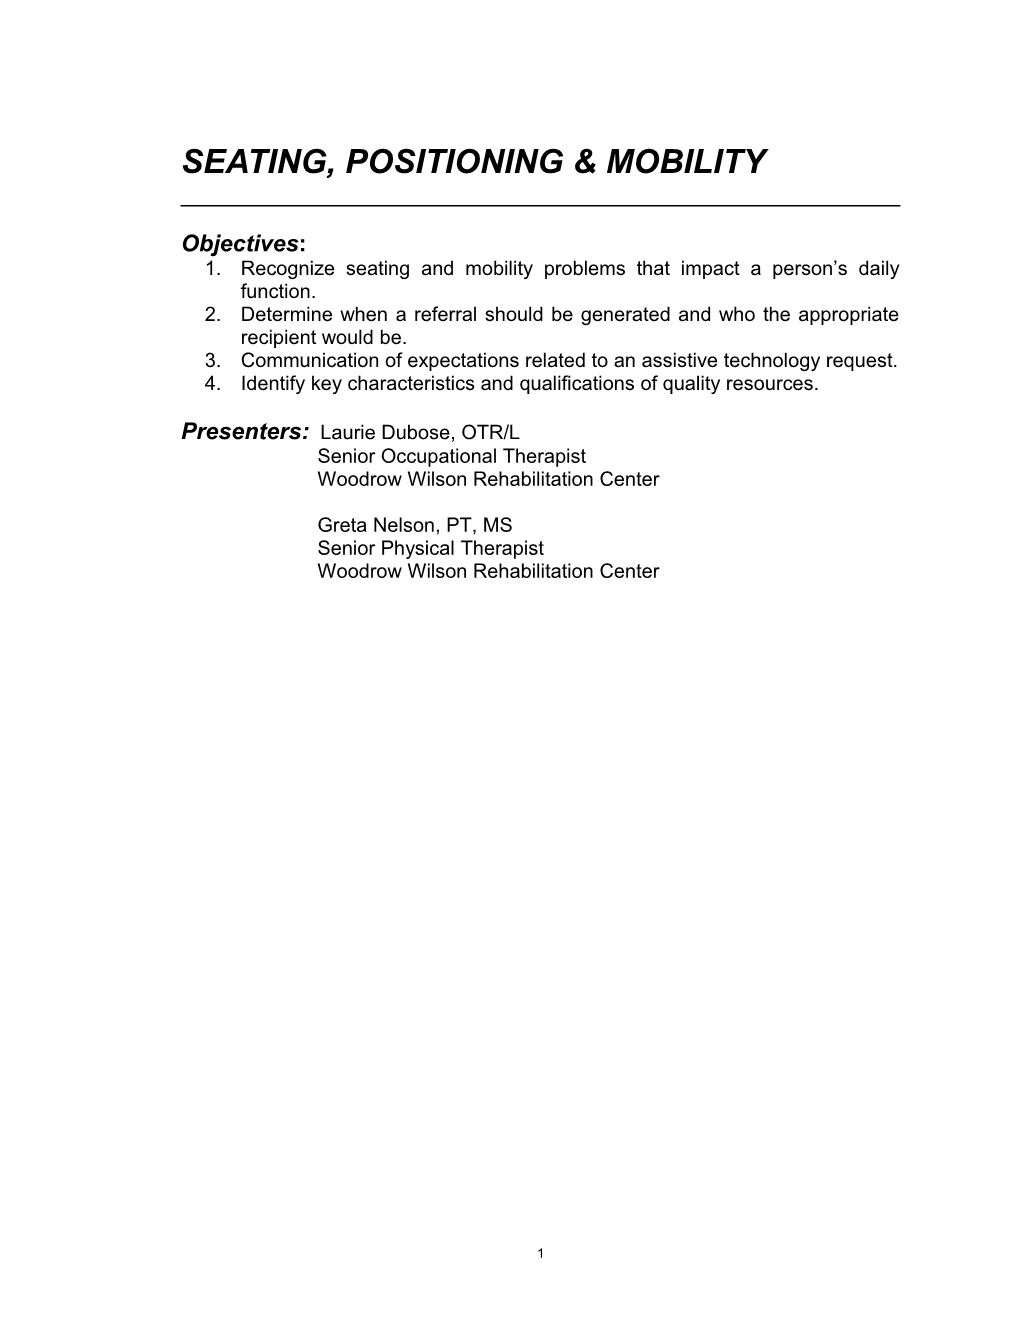 06 - Seating and Positioning